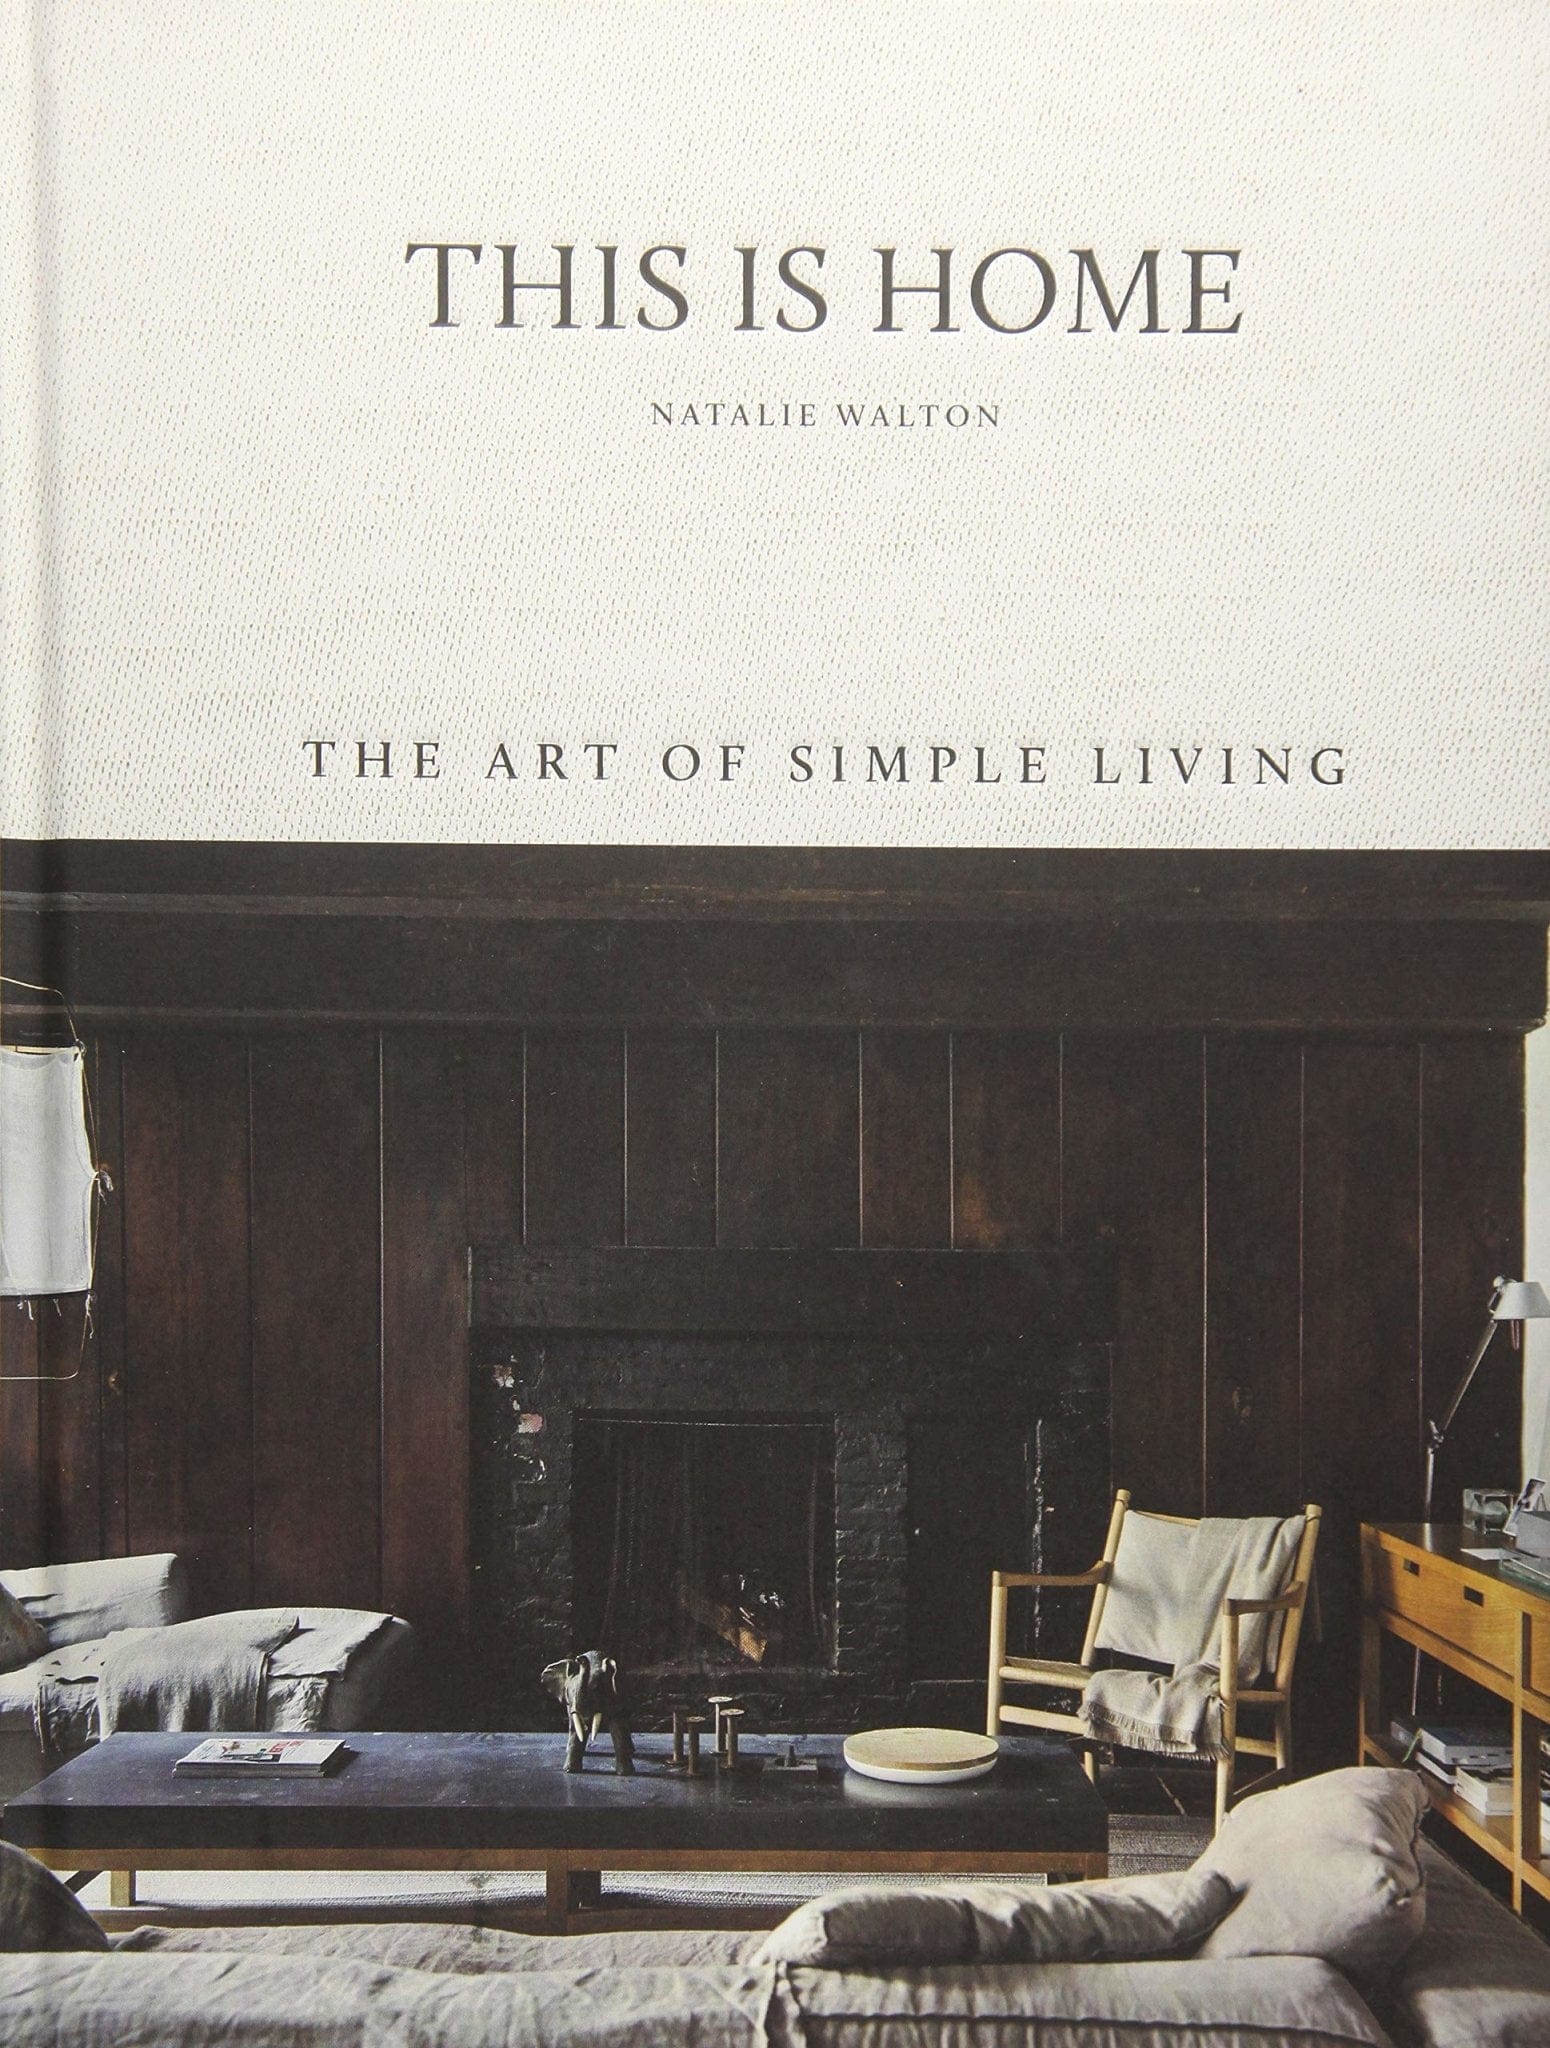 Harper Entertainment Distribution Services Interiors This is Home, The Art of Simple Living By Natalie Walton (4685194035284)